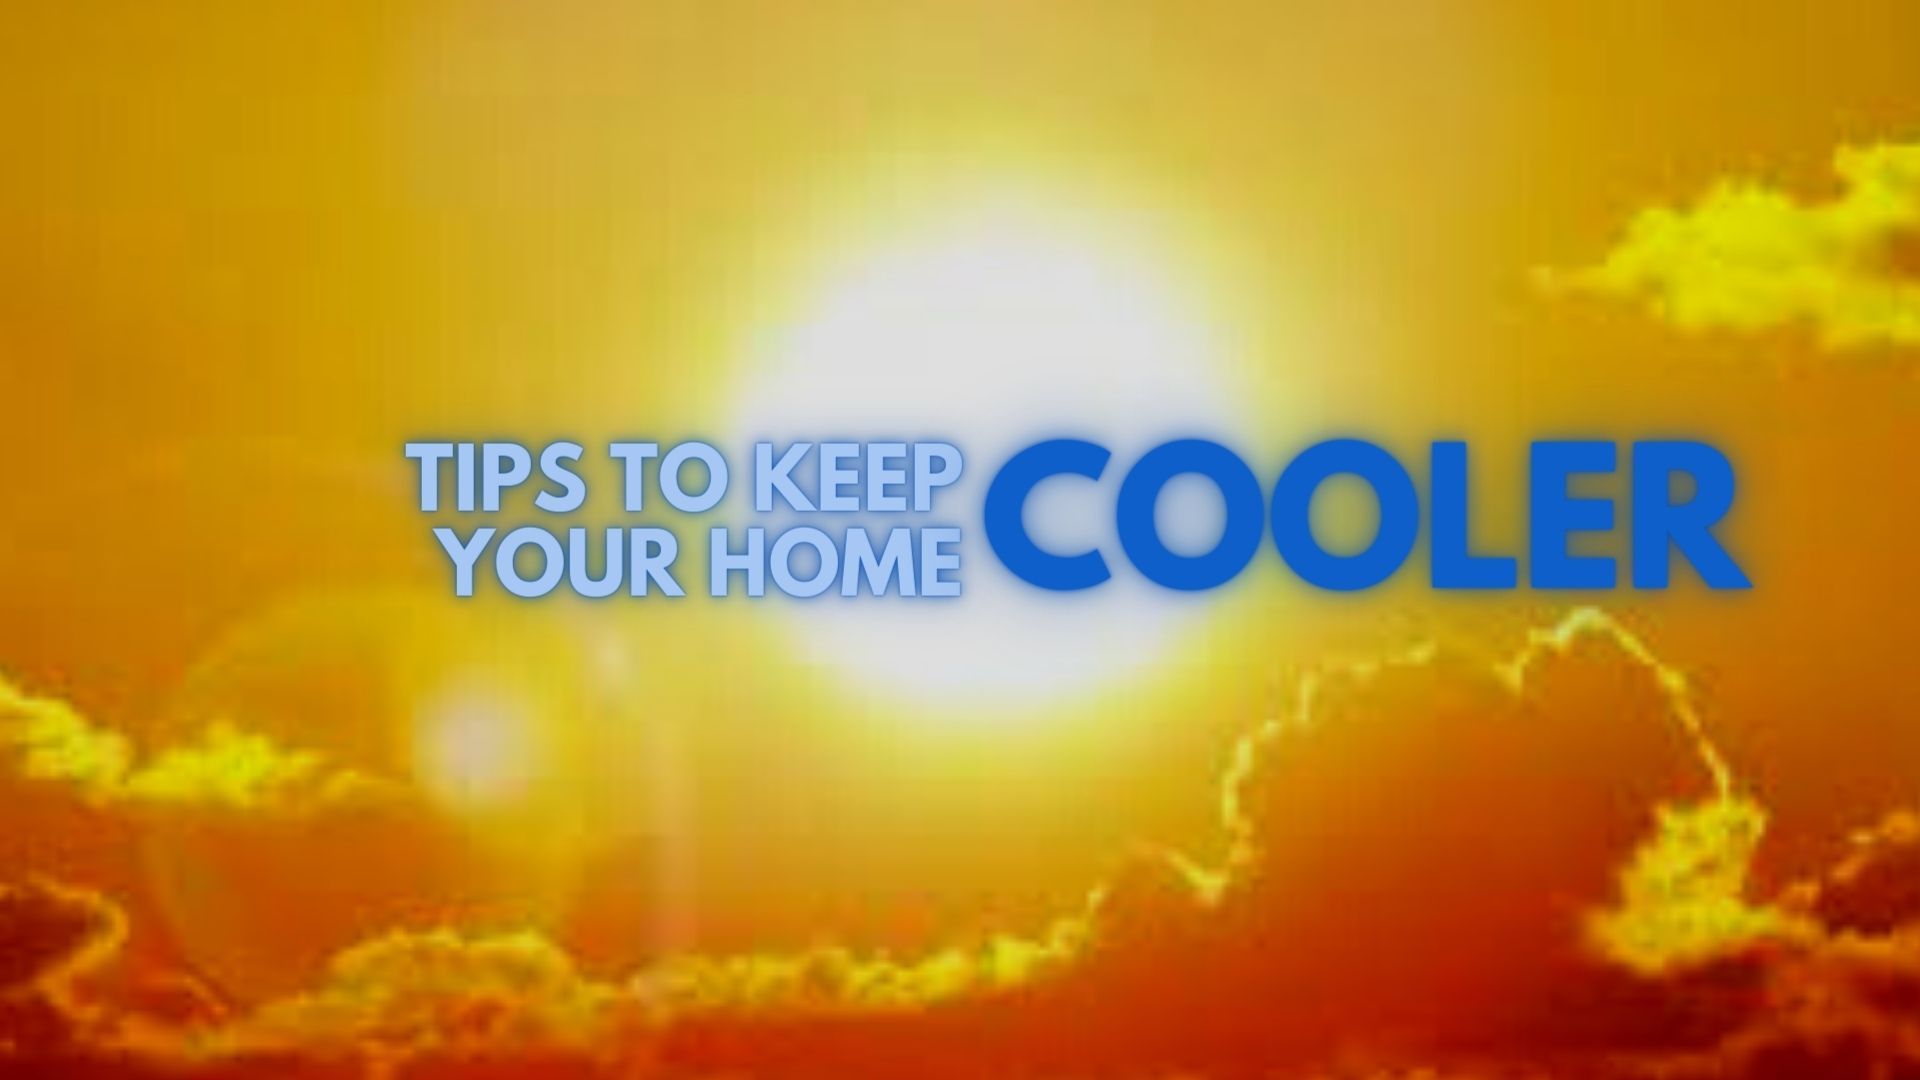 Tips To Keep Your Home Cooler